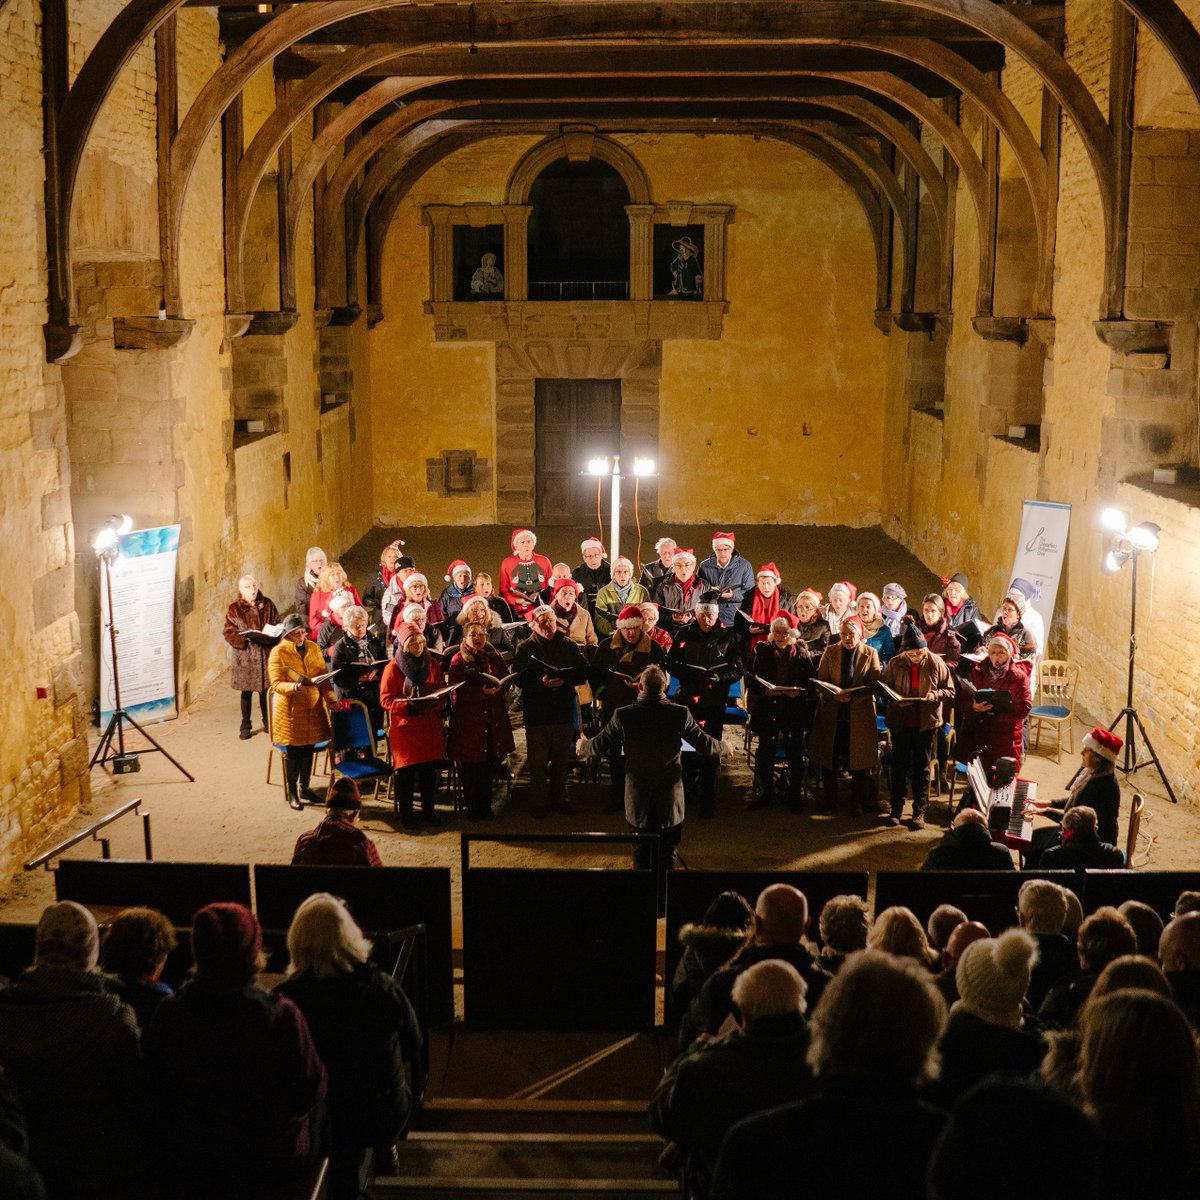 Our first carol concert with Chesterfield Philharmonic Choir is this Thursday evening 🎶✨ It's going to be a really magical and christmassy evening so do come along to get yourself in the festive spirit! Book your ticket here 👉 tinyurl.com/bolsover-carol…